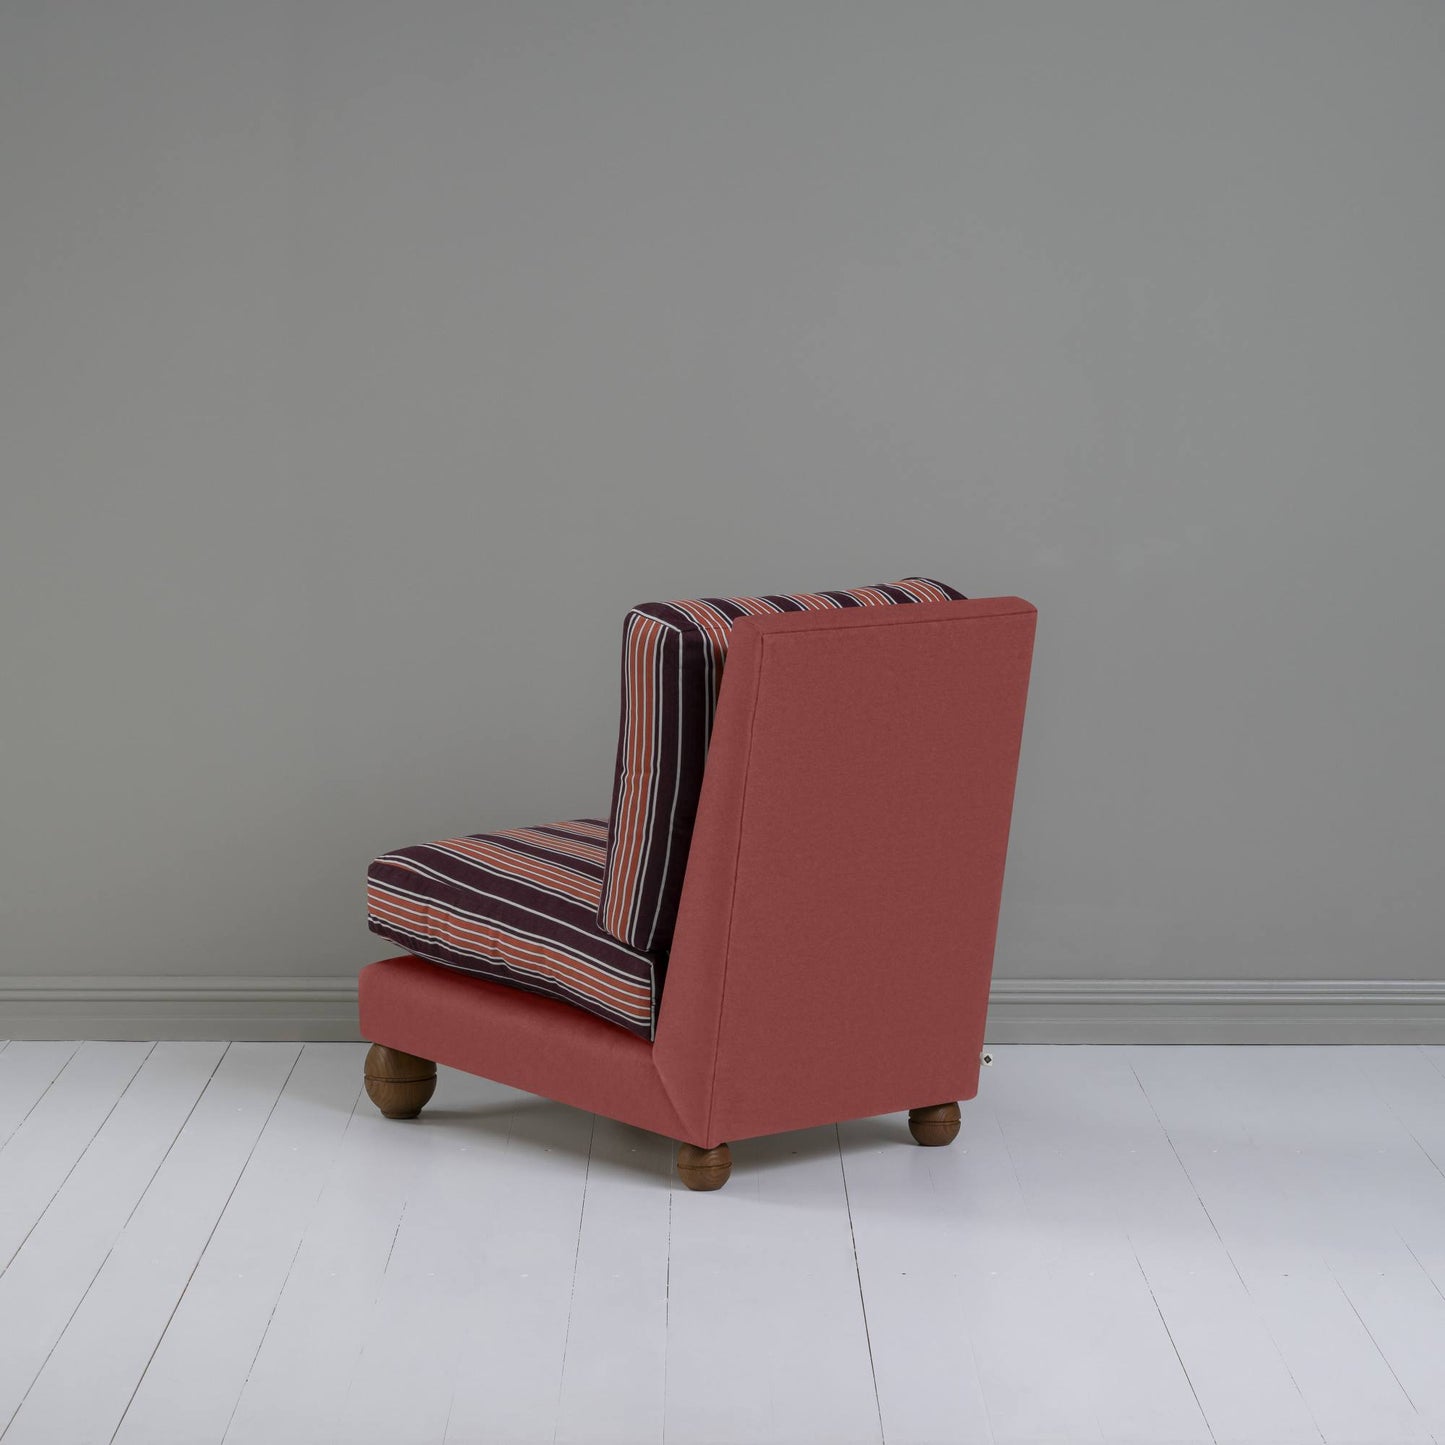 Perch Slipper Armchair in Laidback Linen Rouge Frame, with Regatta Cotton, Flame Seat